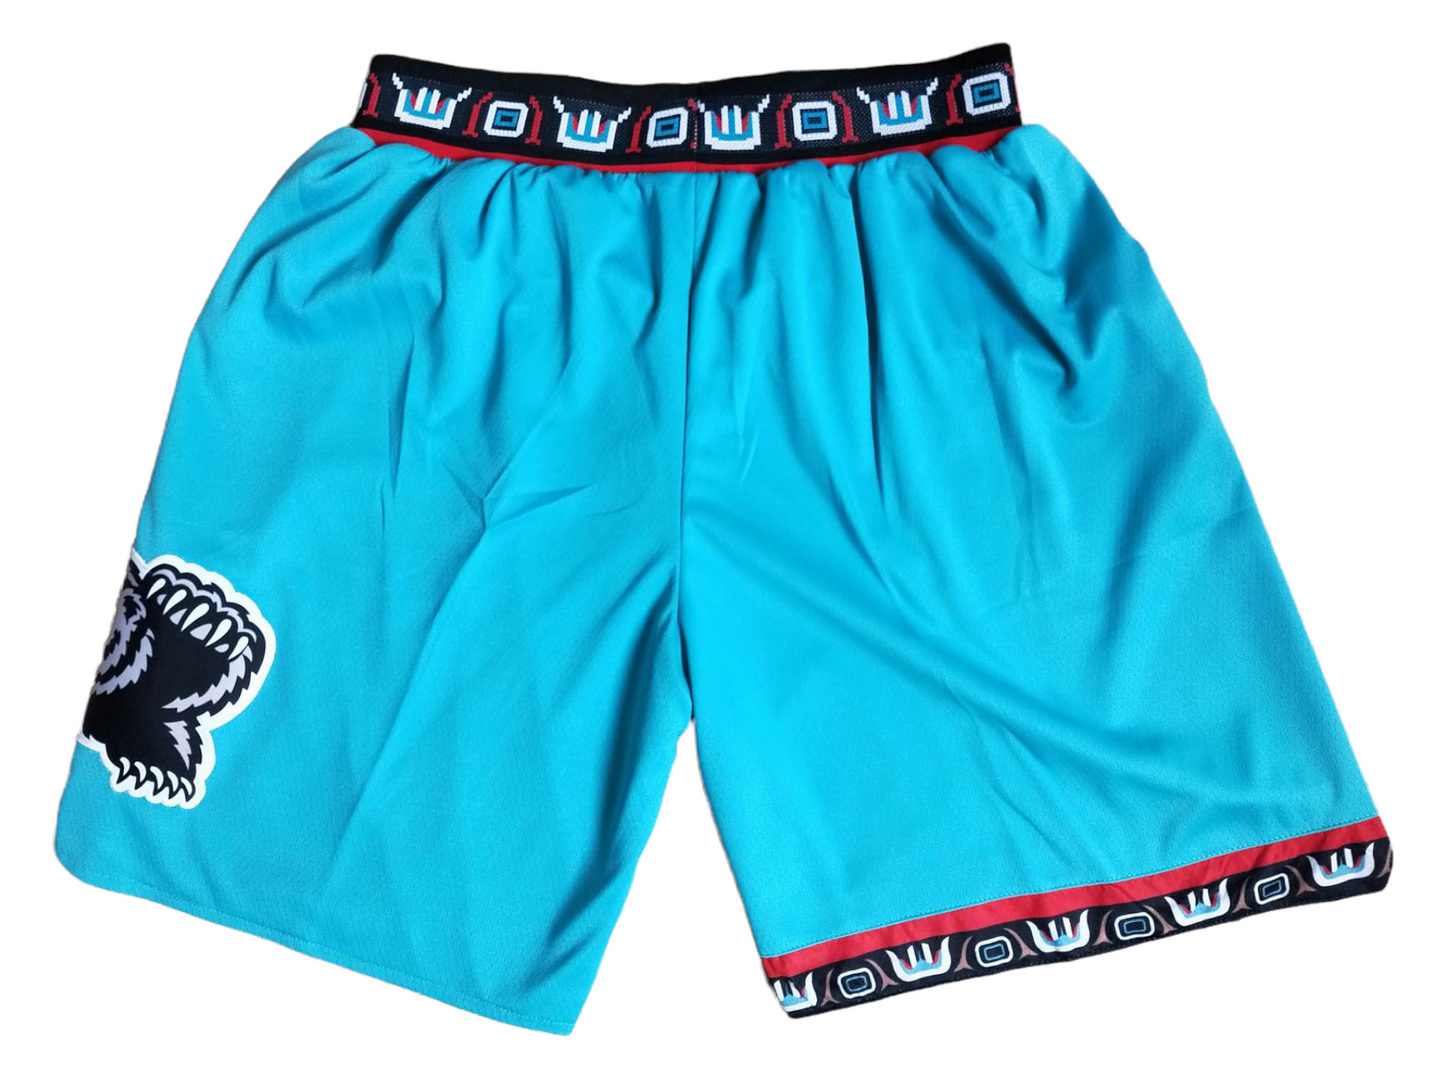 Vancouver Grizzlies Basketball Shorts